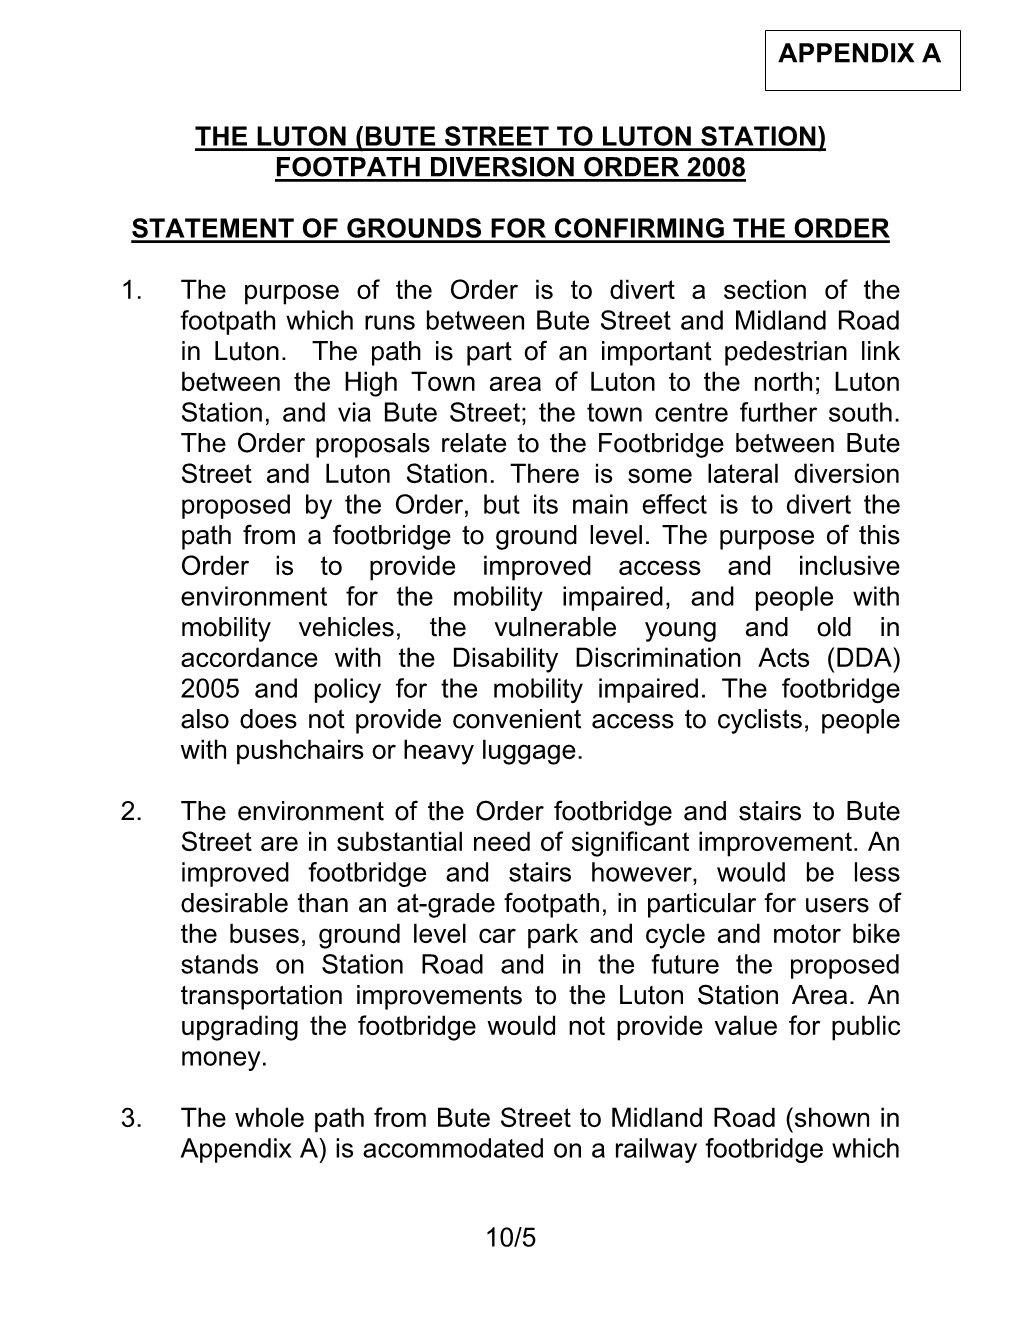 Bute Street to Luton Station) Footpath Diversion Order 2008